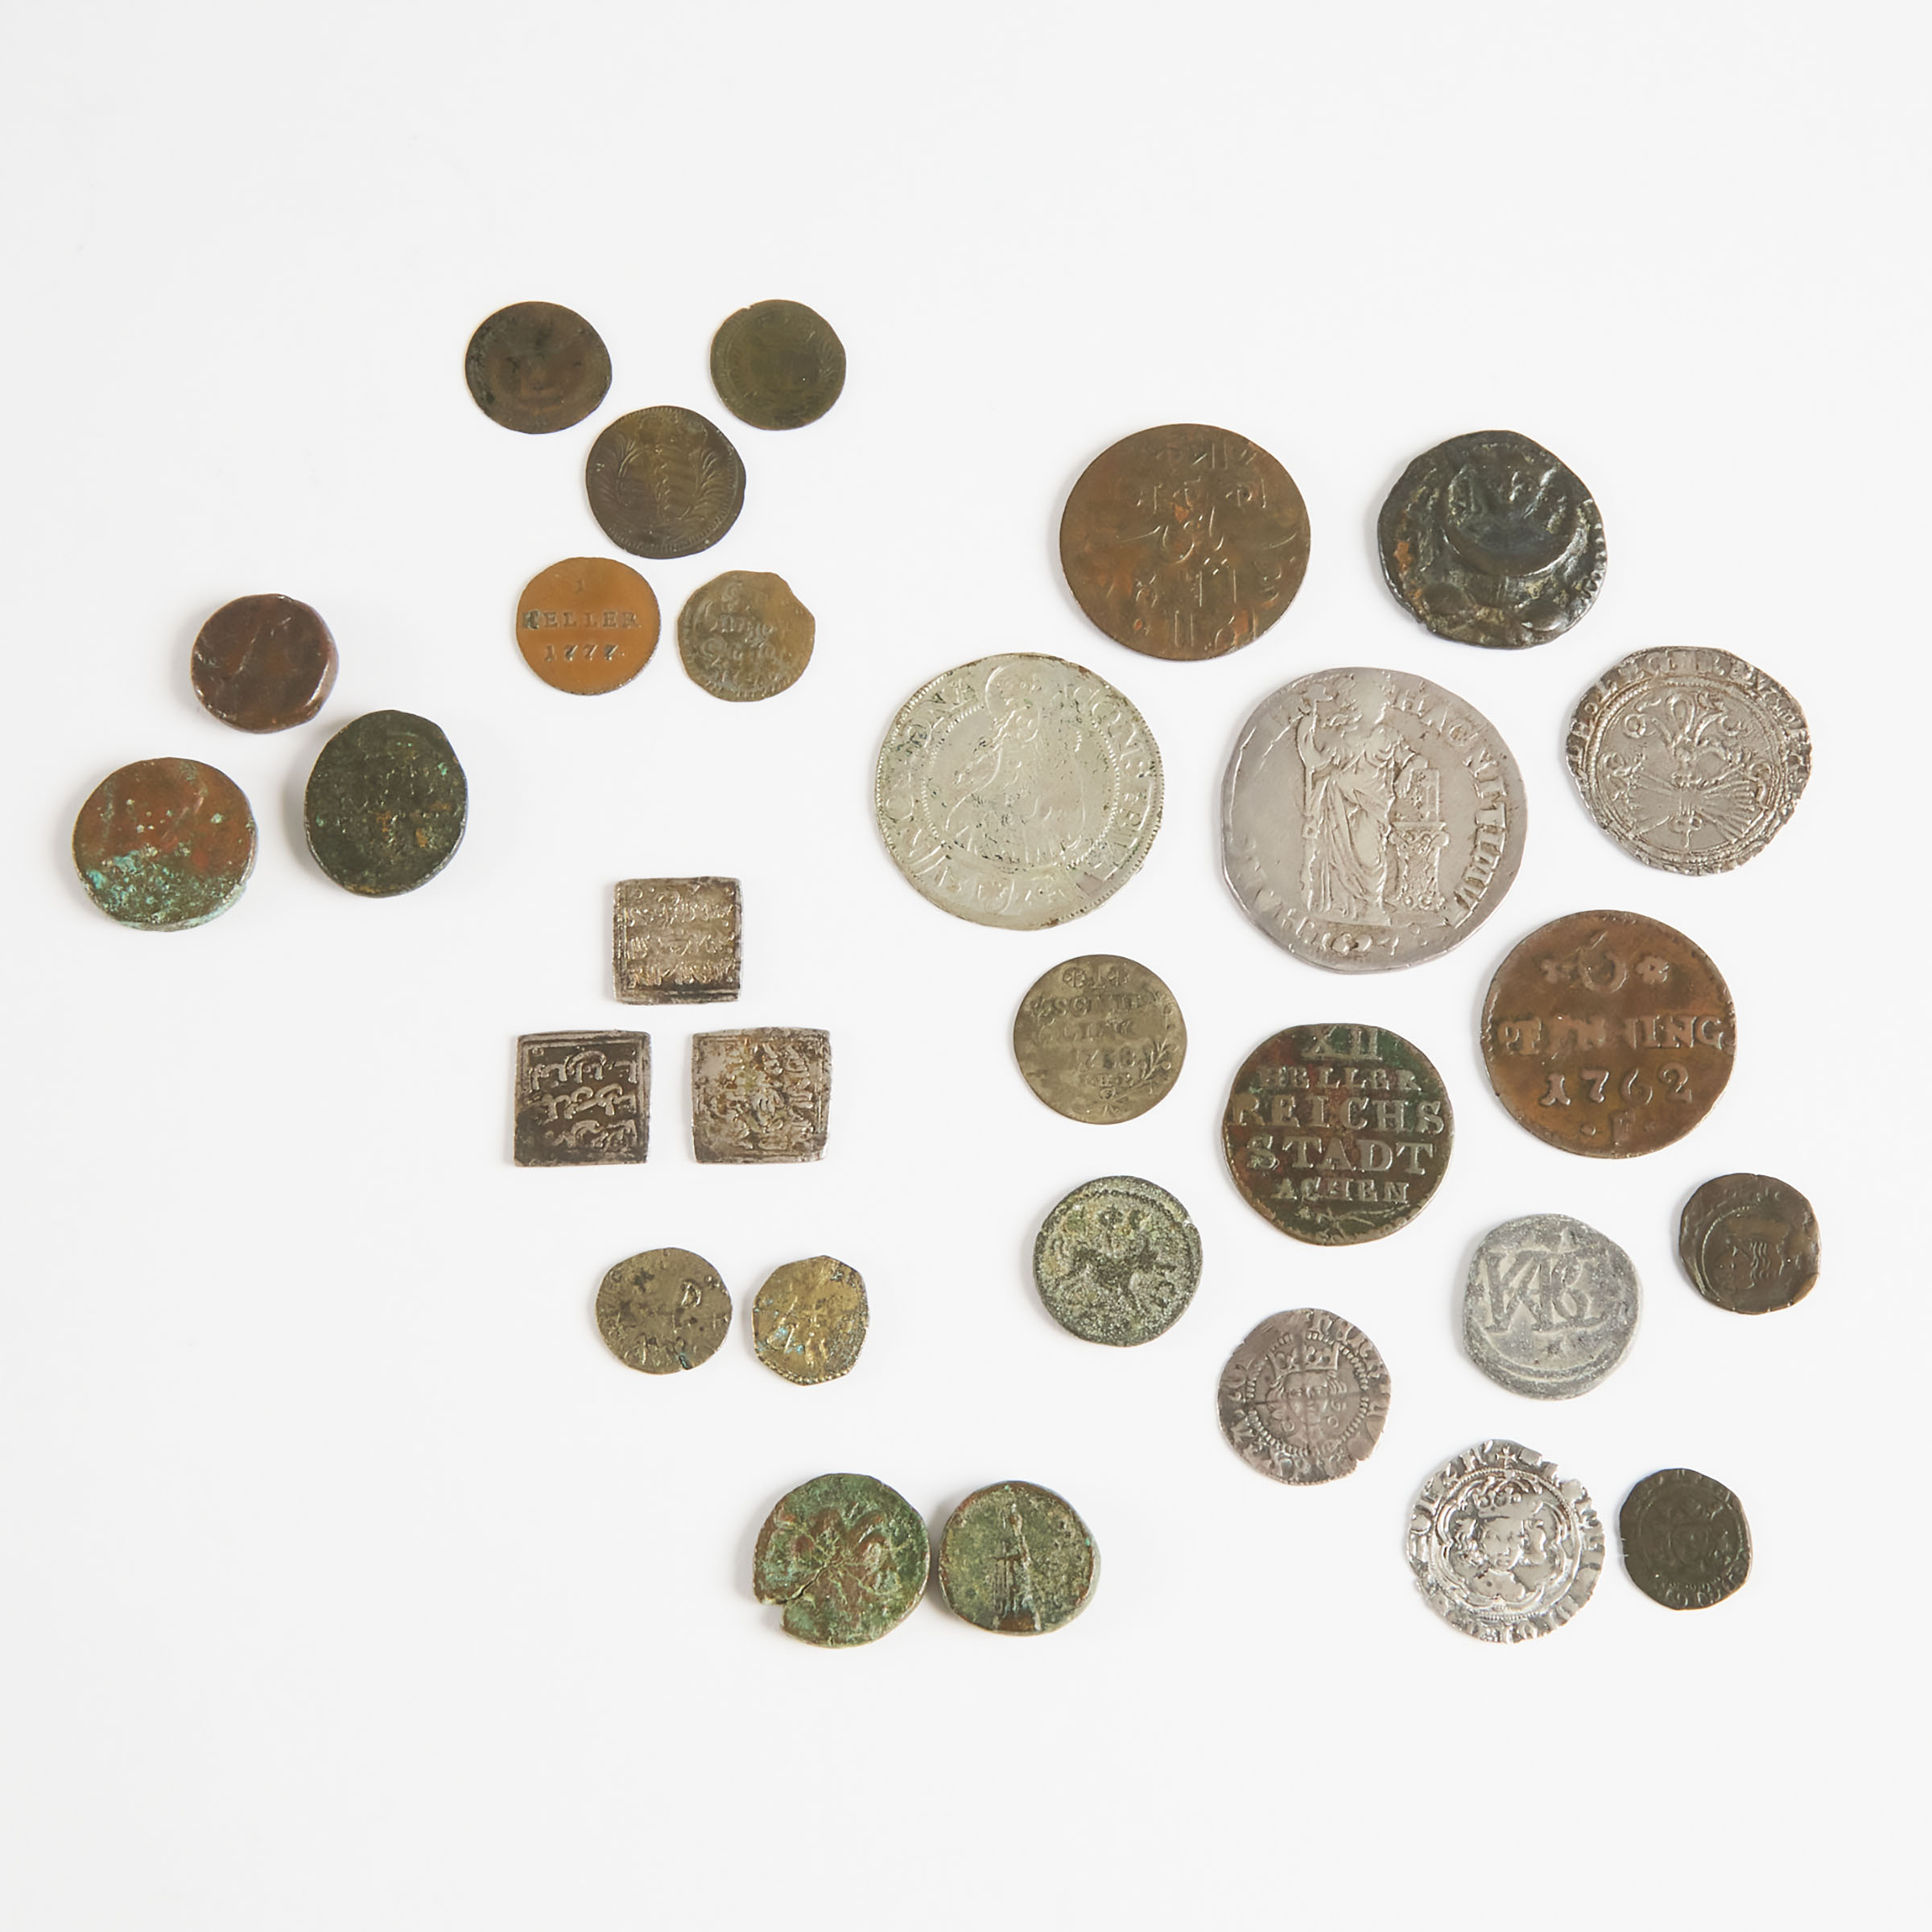 Small Quantity Of Various Ancient And Medieval Coins

